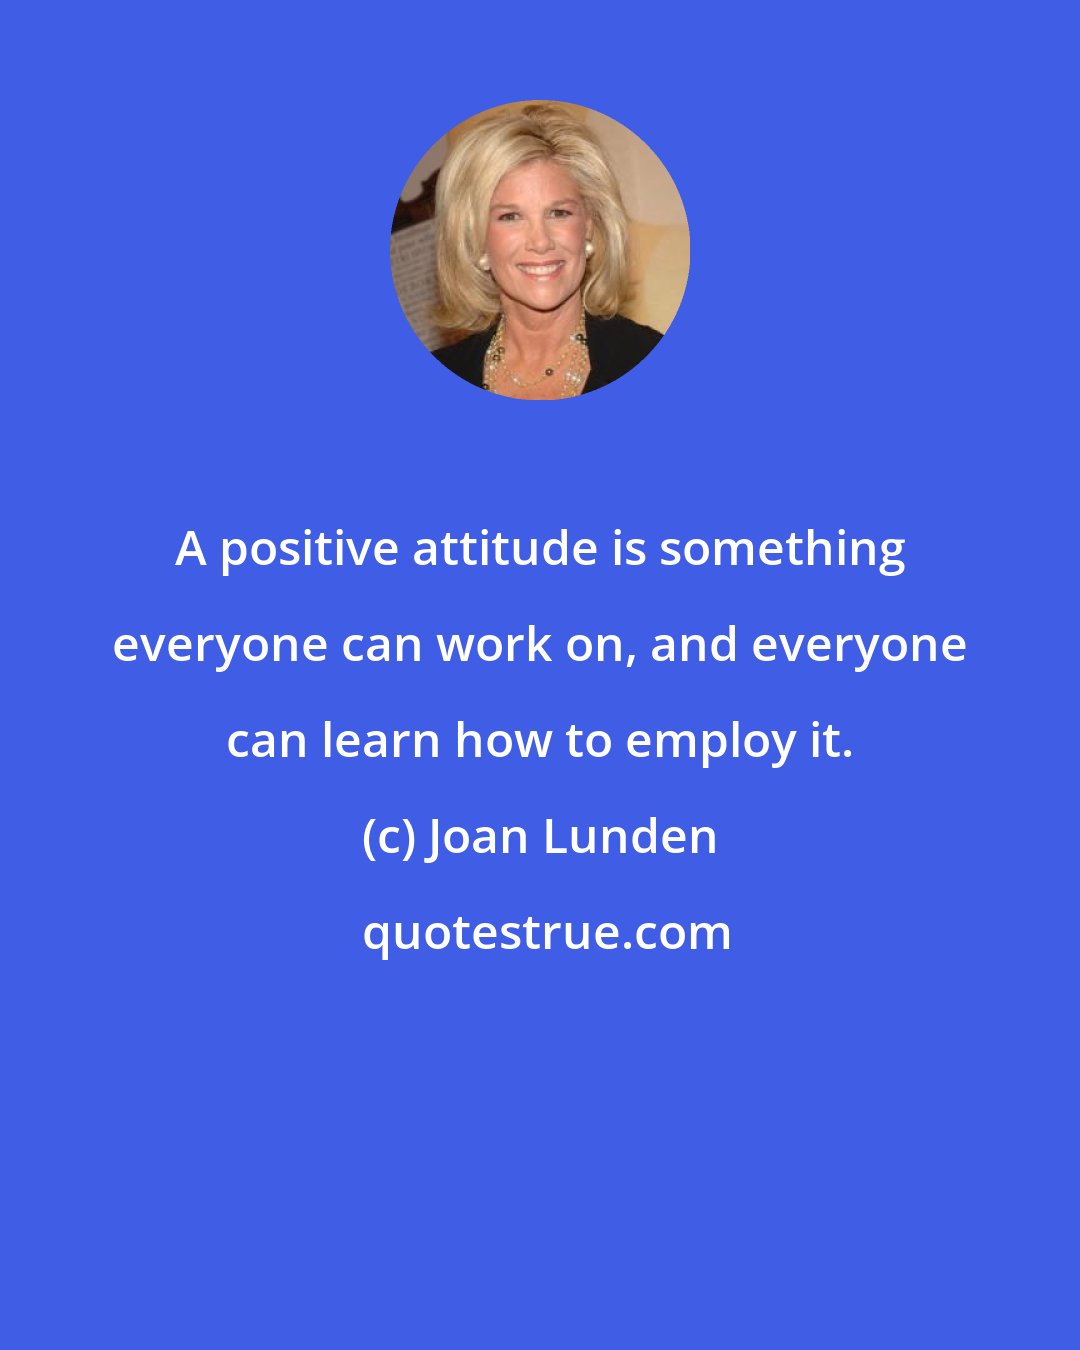 Joan Lunden: A positive attitude is something everyone can work on, and everyone can learn how to employ it.